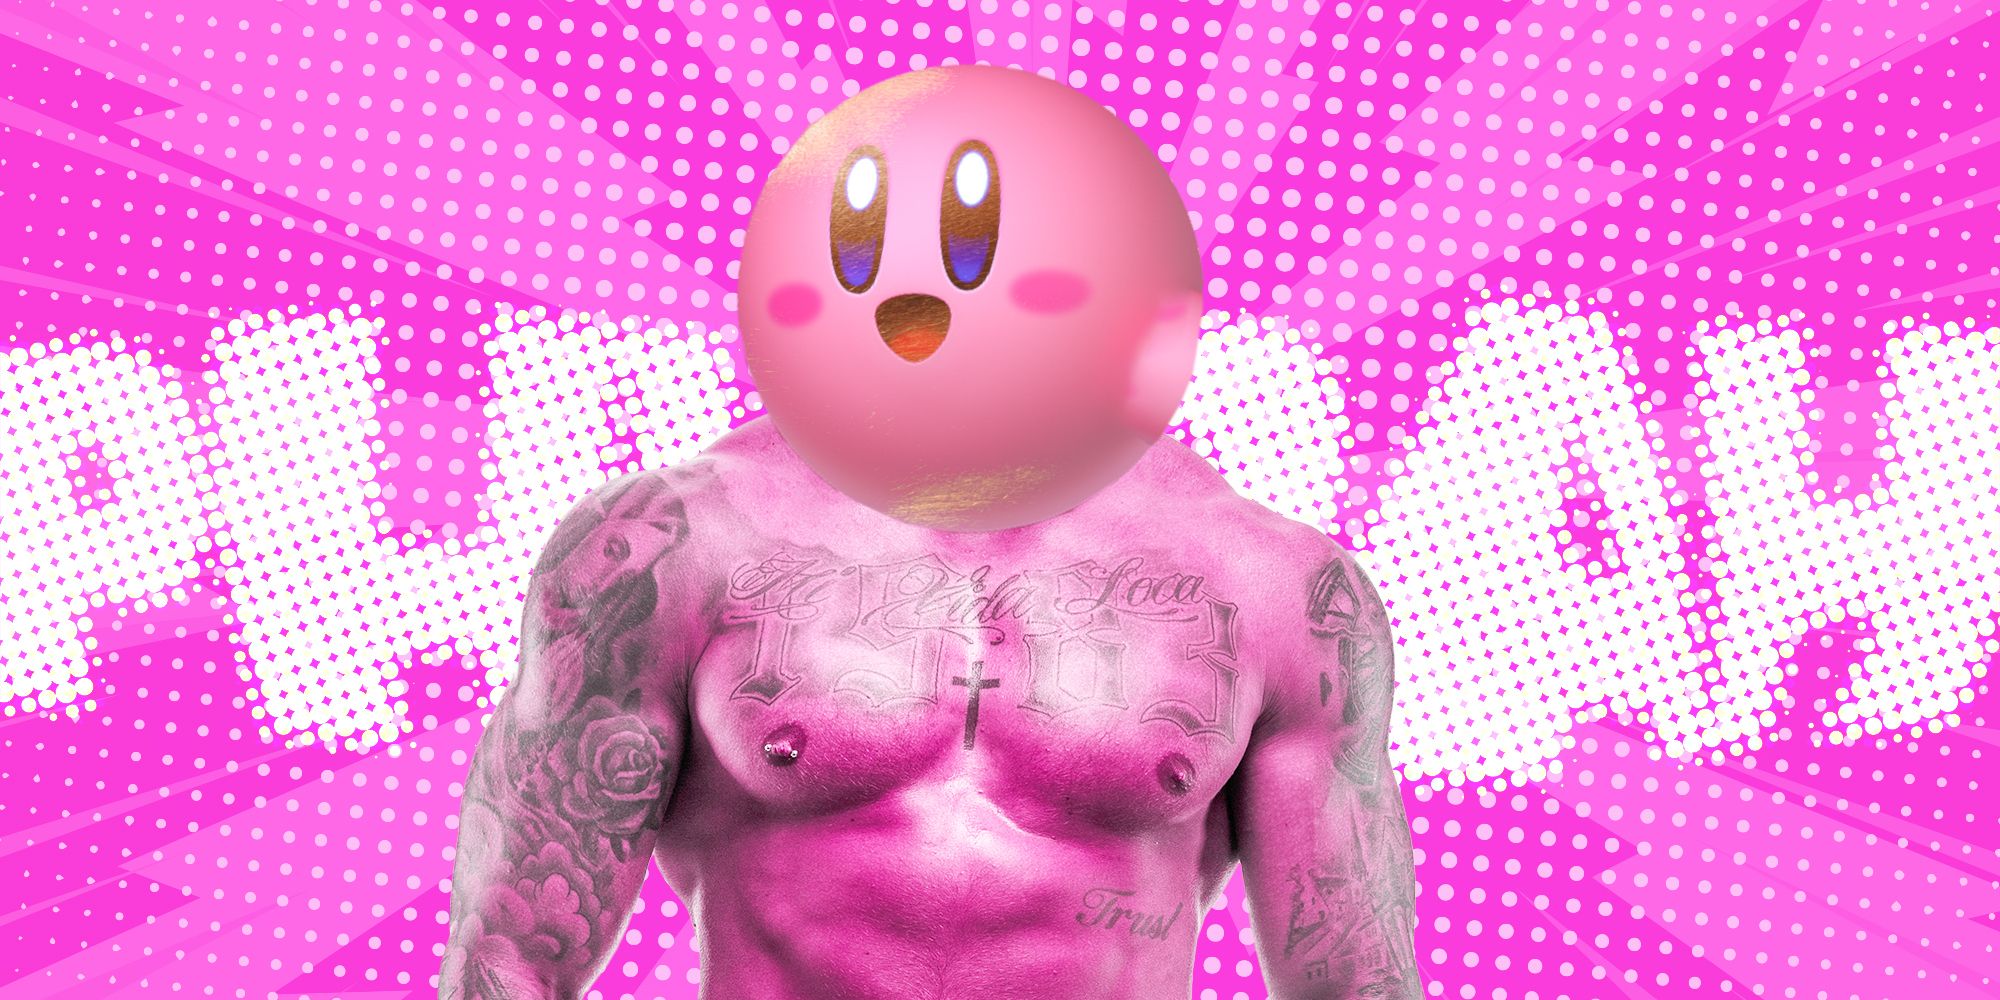 Kirby Wouldn’t Turn Into A Hot Man If He Ate A Hot Man, Says Game Director